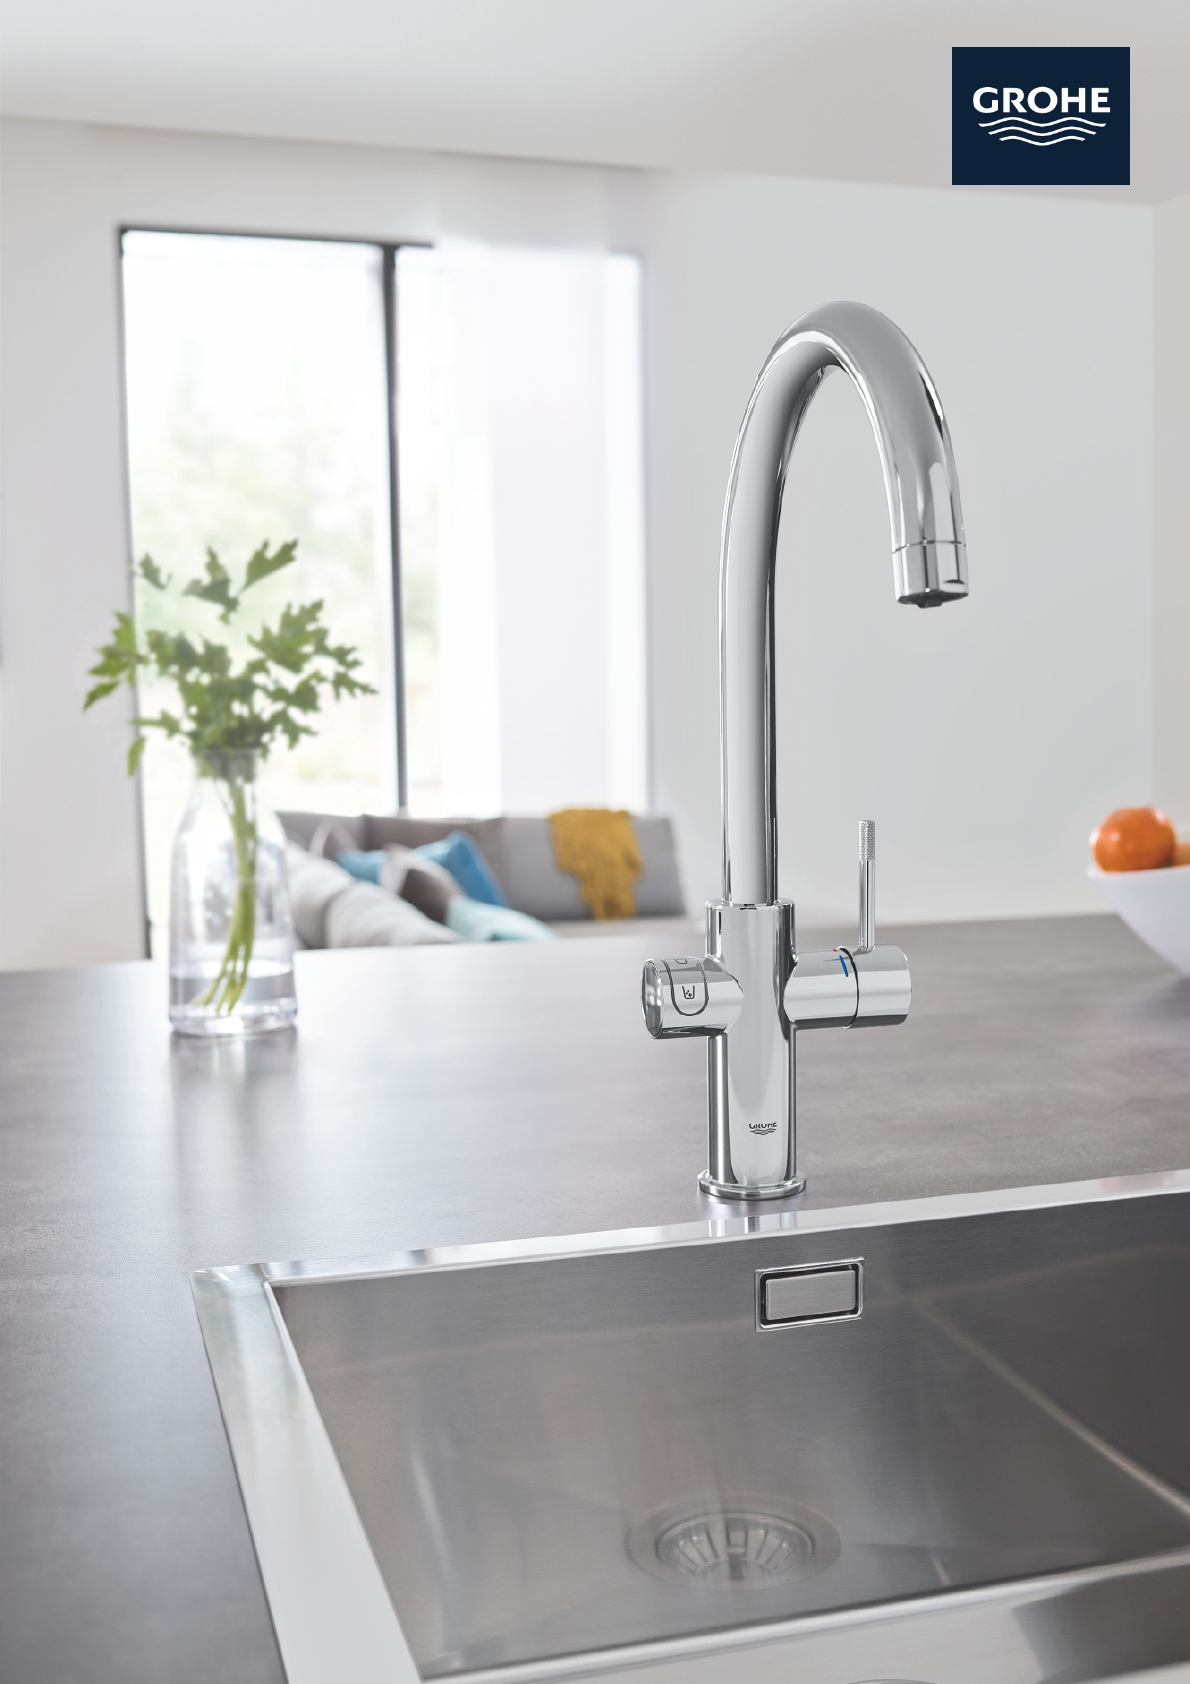 Grohe Blue Home (page 1 of 5) (Dutch)